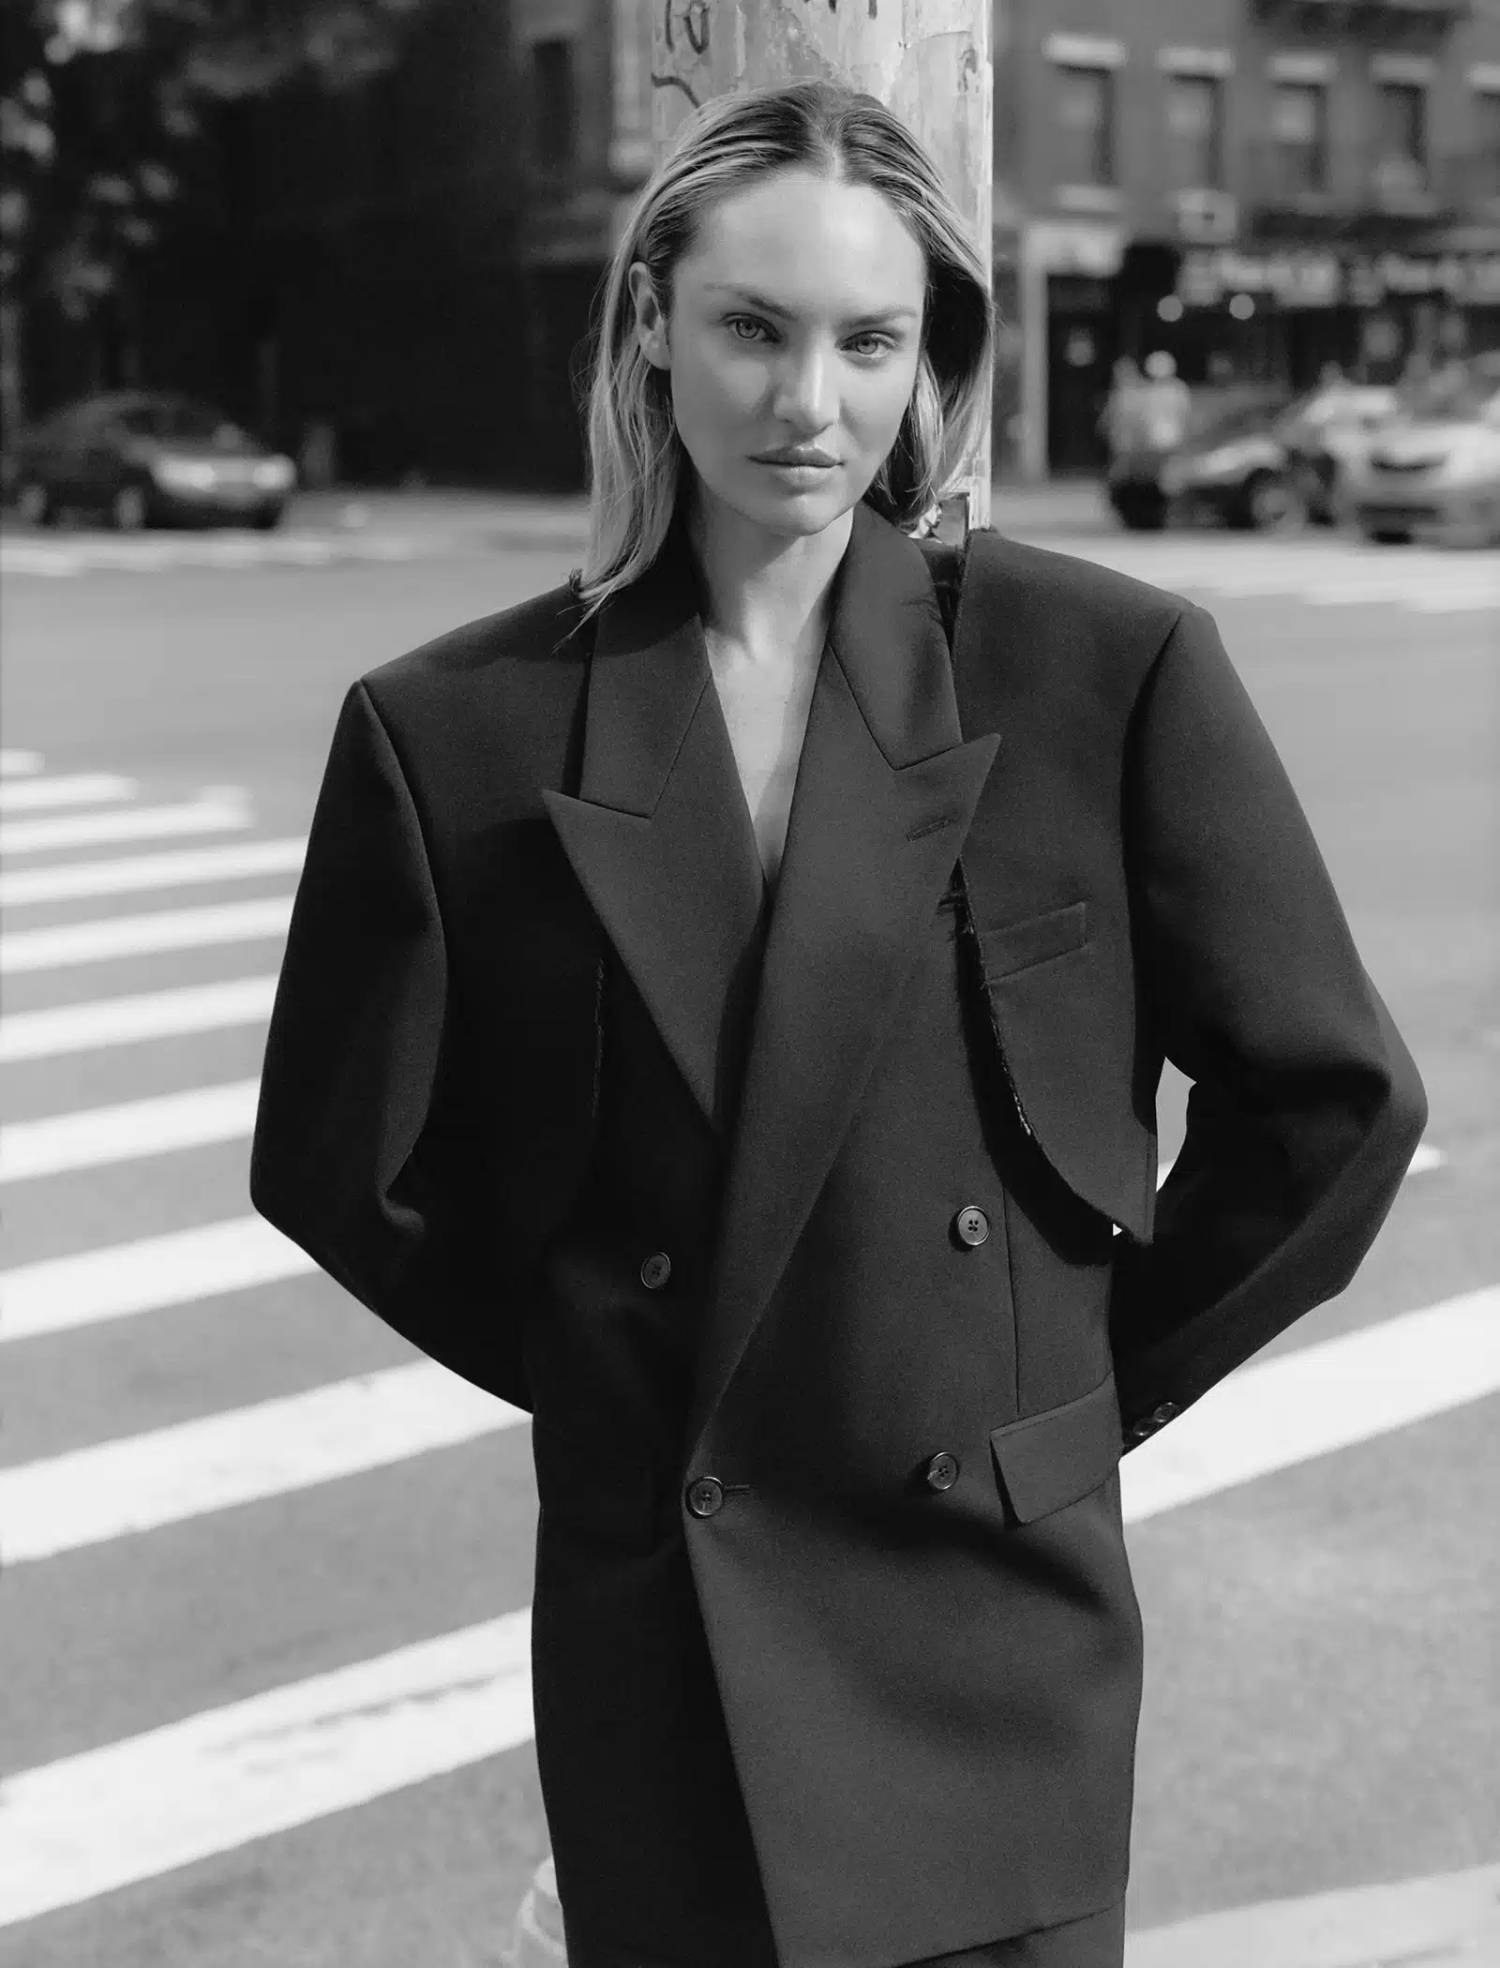 Candice Swanepoel in The Row Black Coat by Heather Hazzan for Puss Puss Magazine Fall-Winter 2023